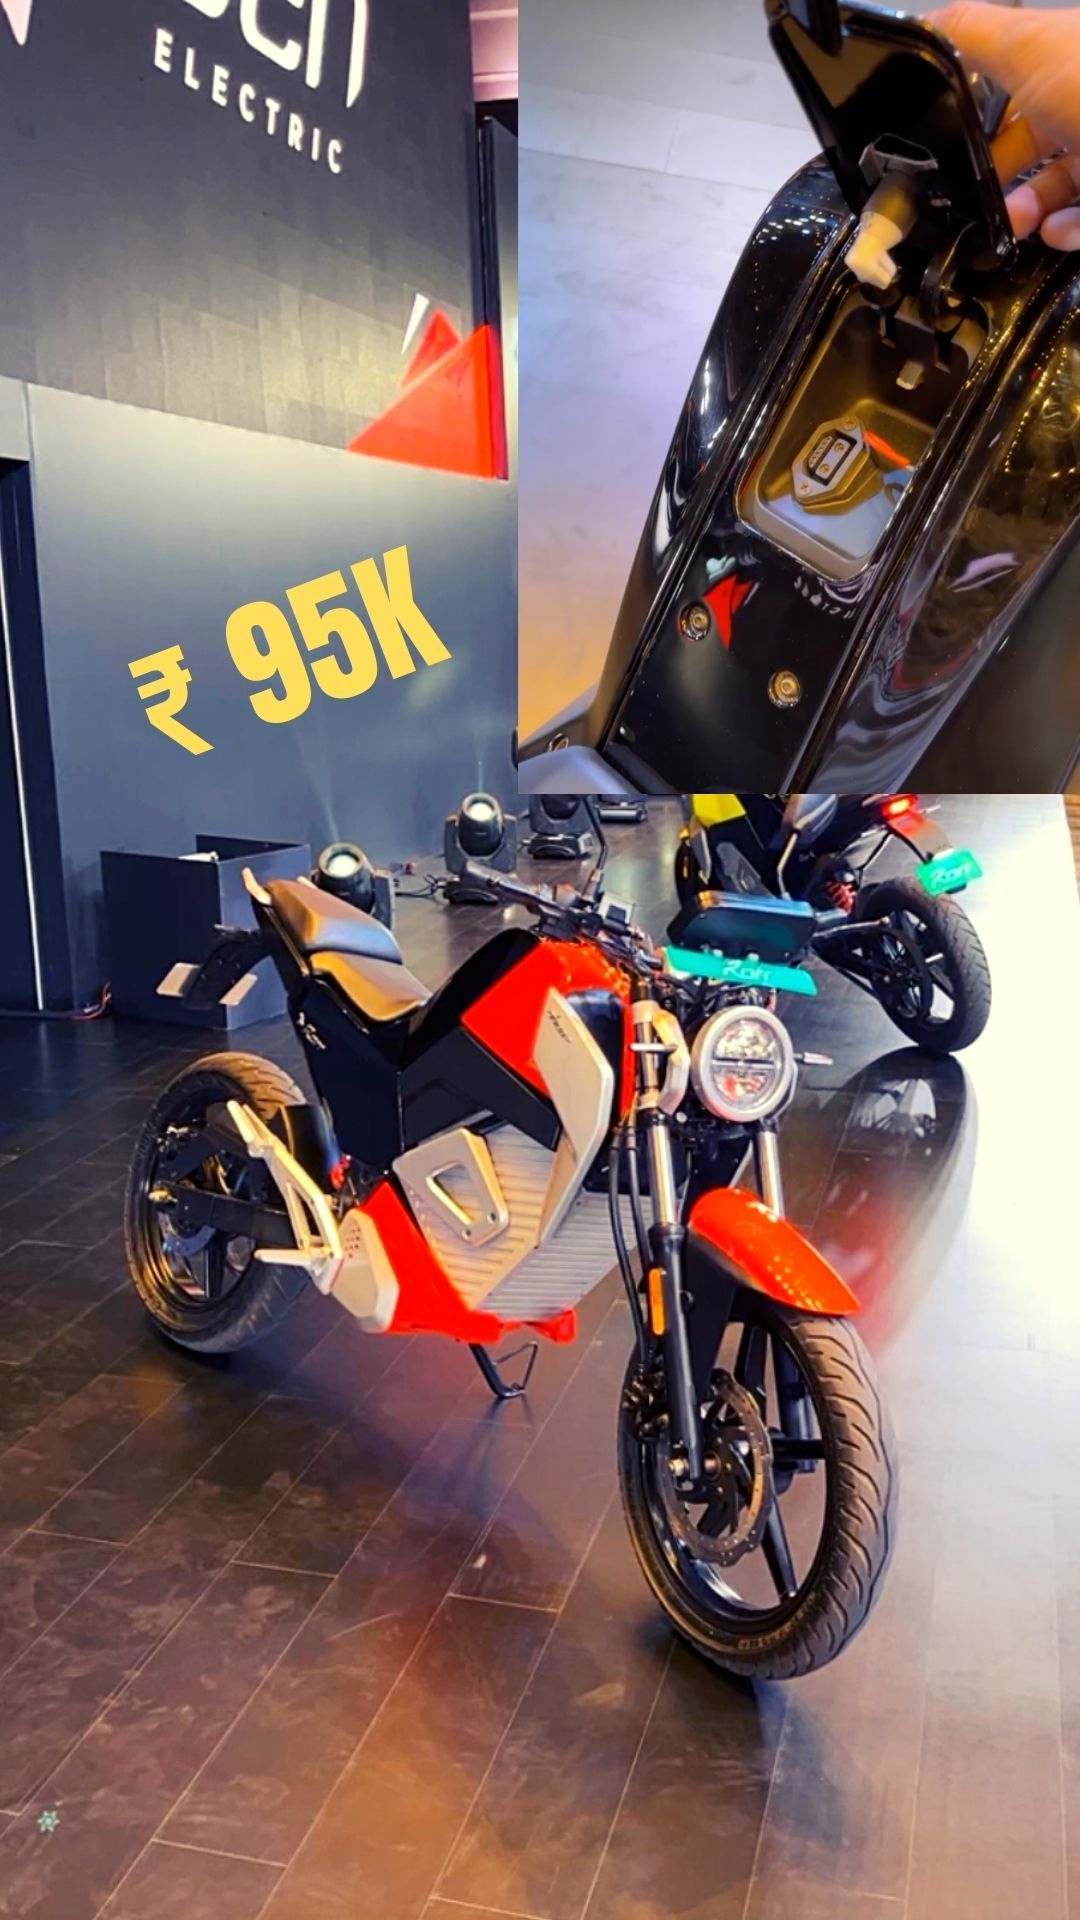 Oben Rorr Electric bike with 150km range launched